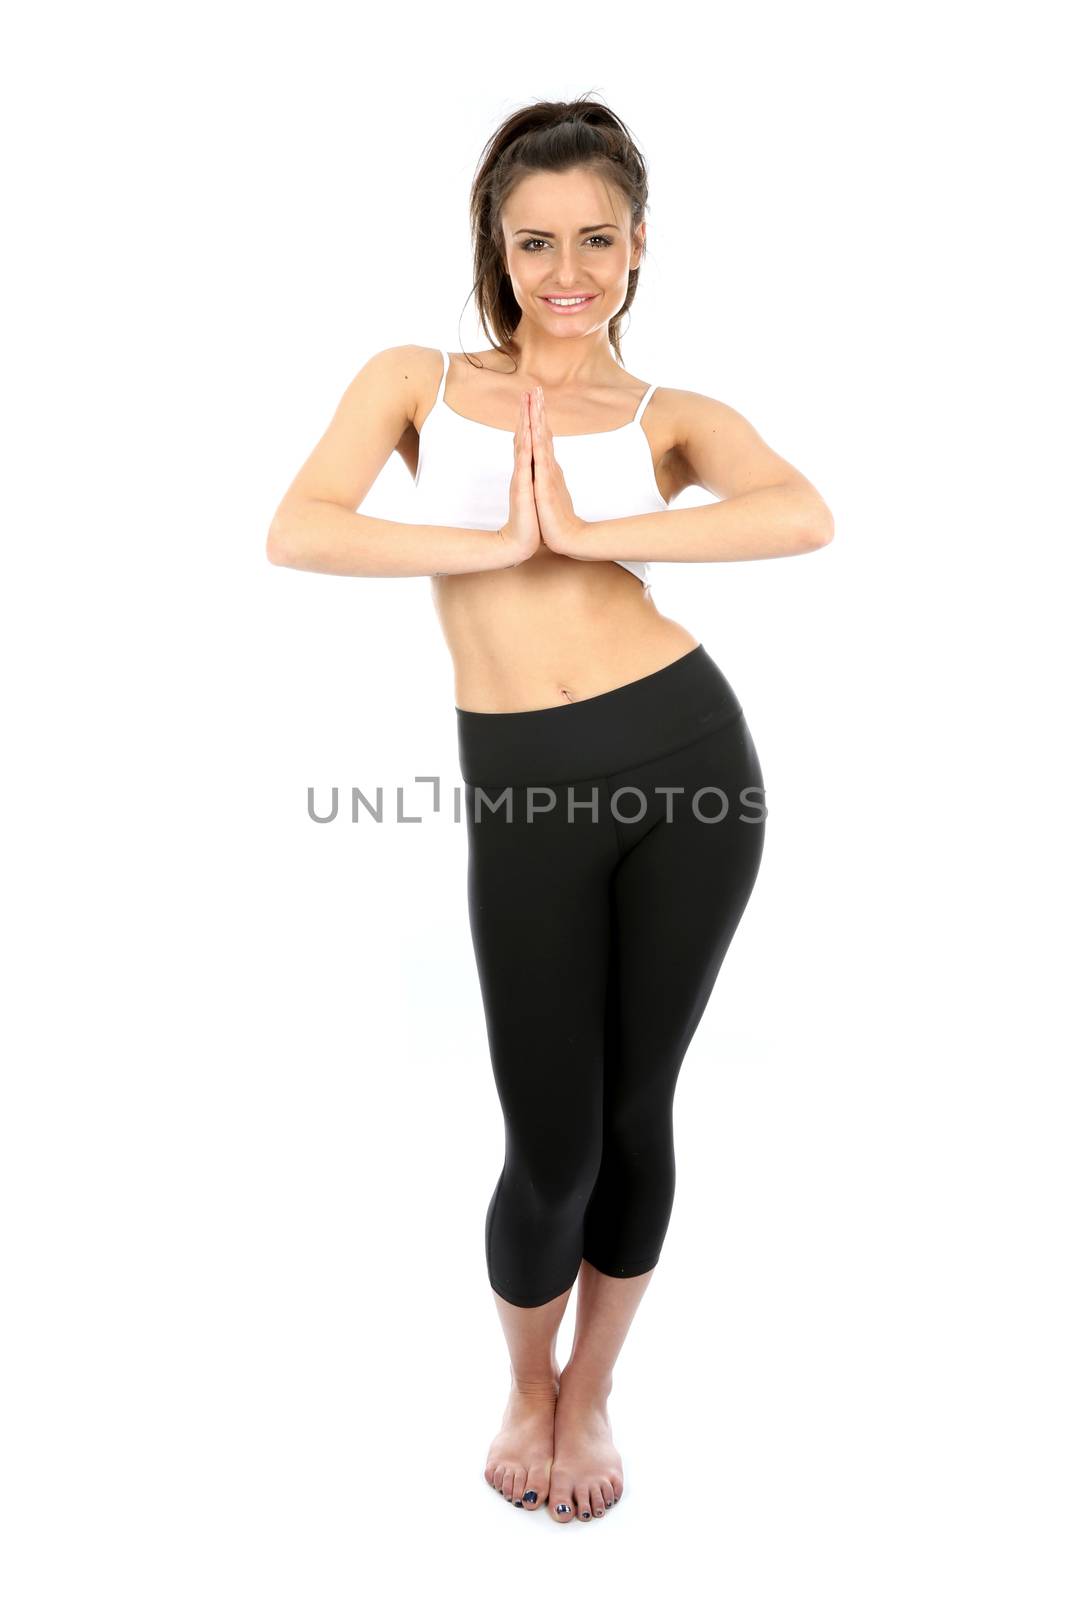 Model Released. Woman Exercising